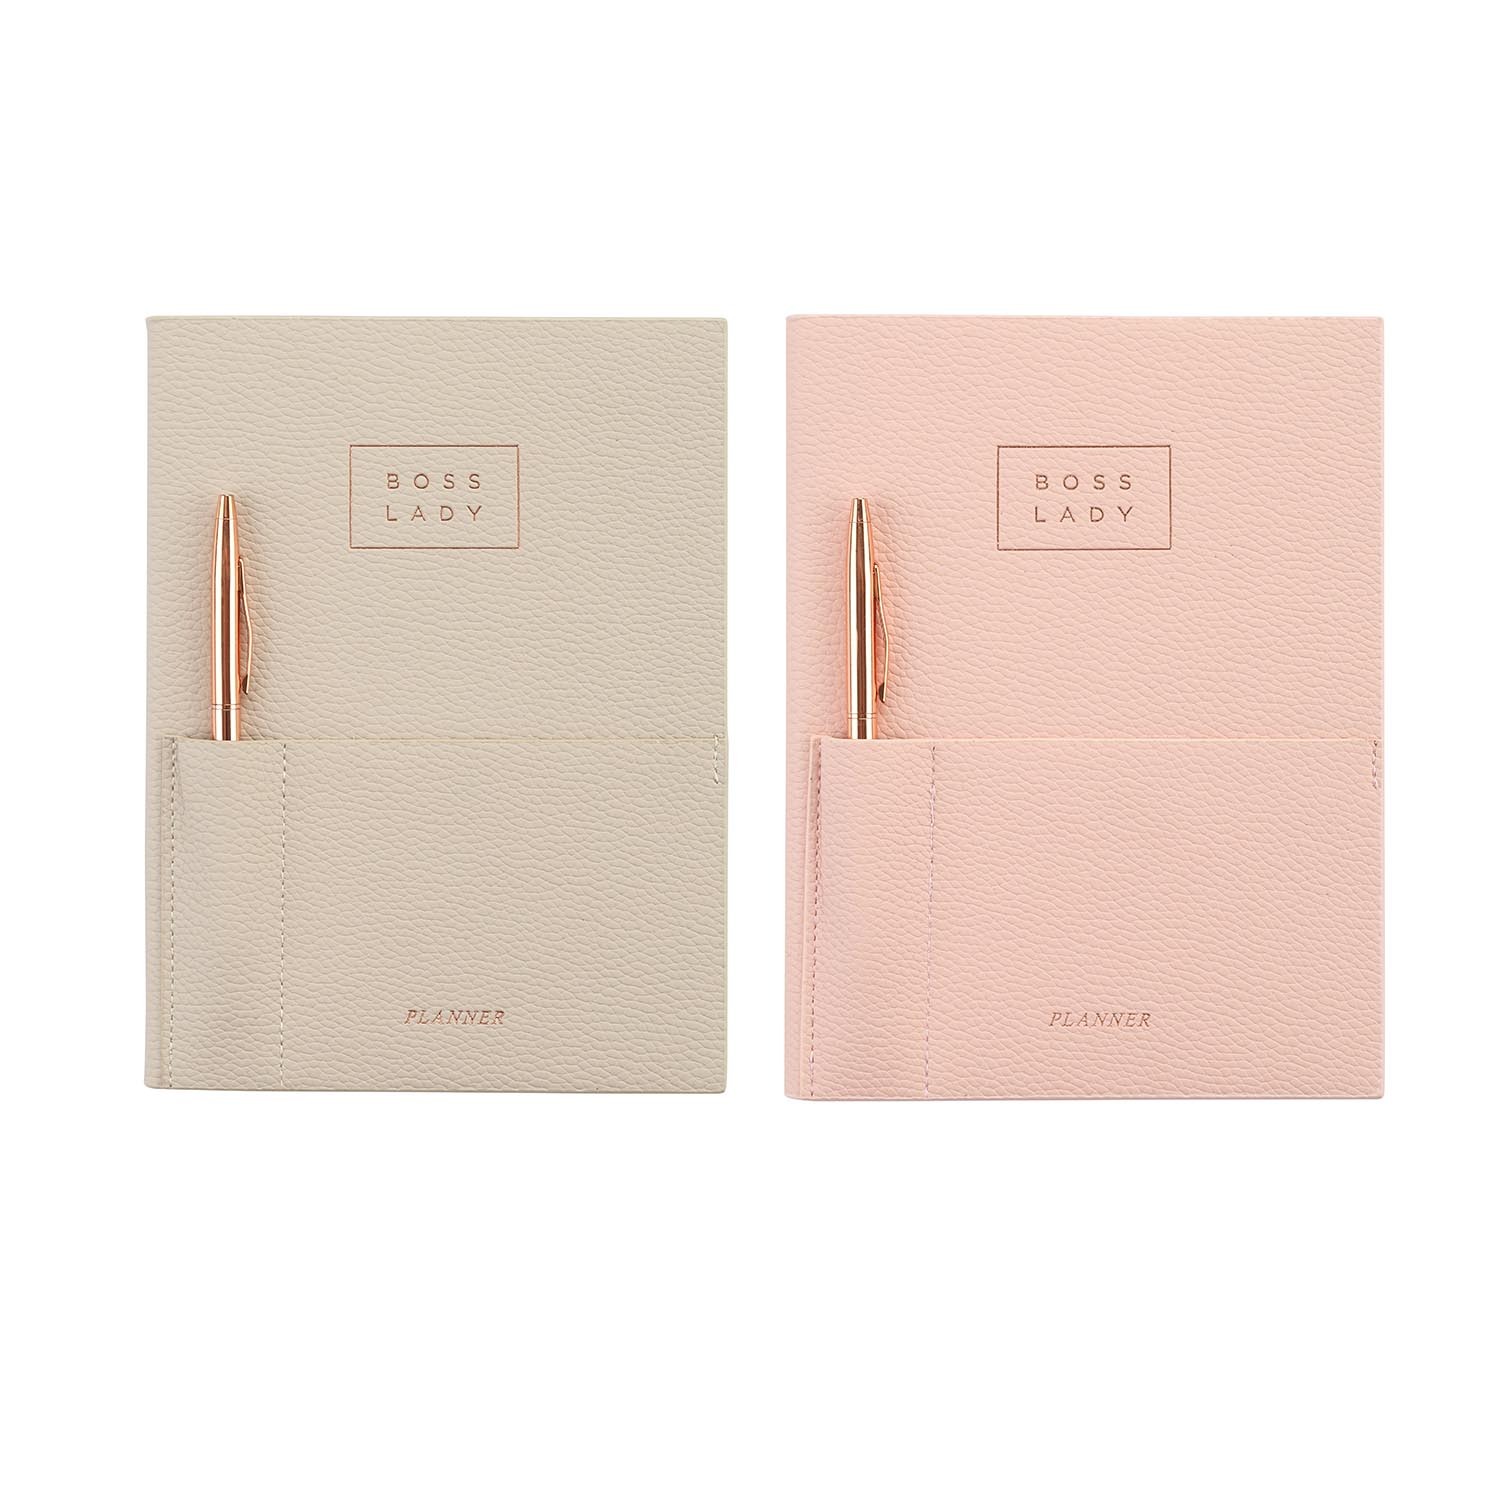 Single Planner with Rose Gold Pen in Assorted styles Image